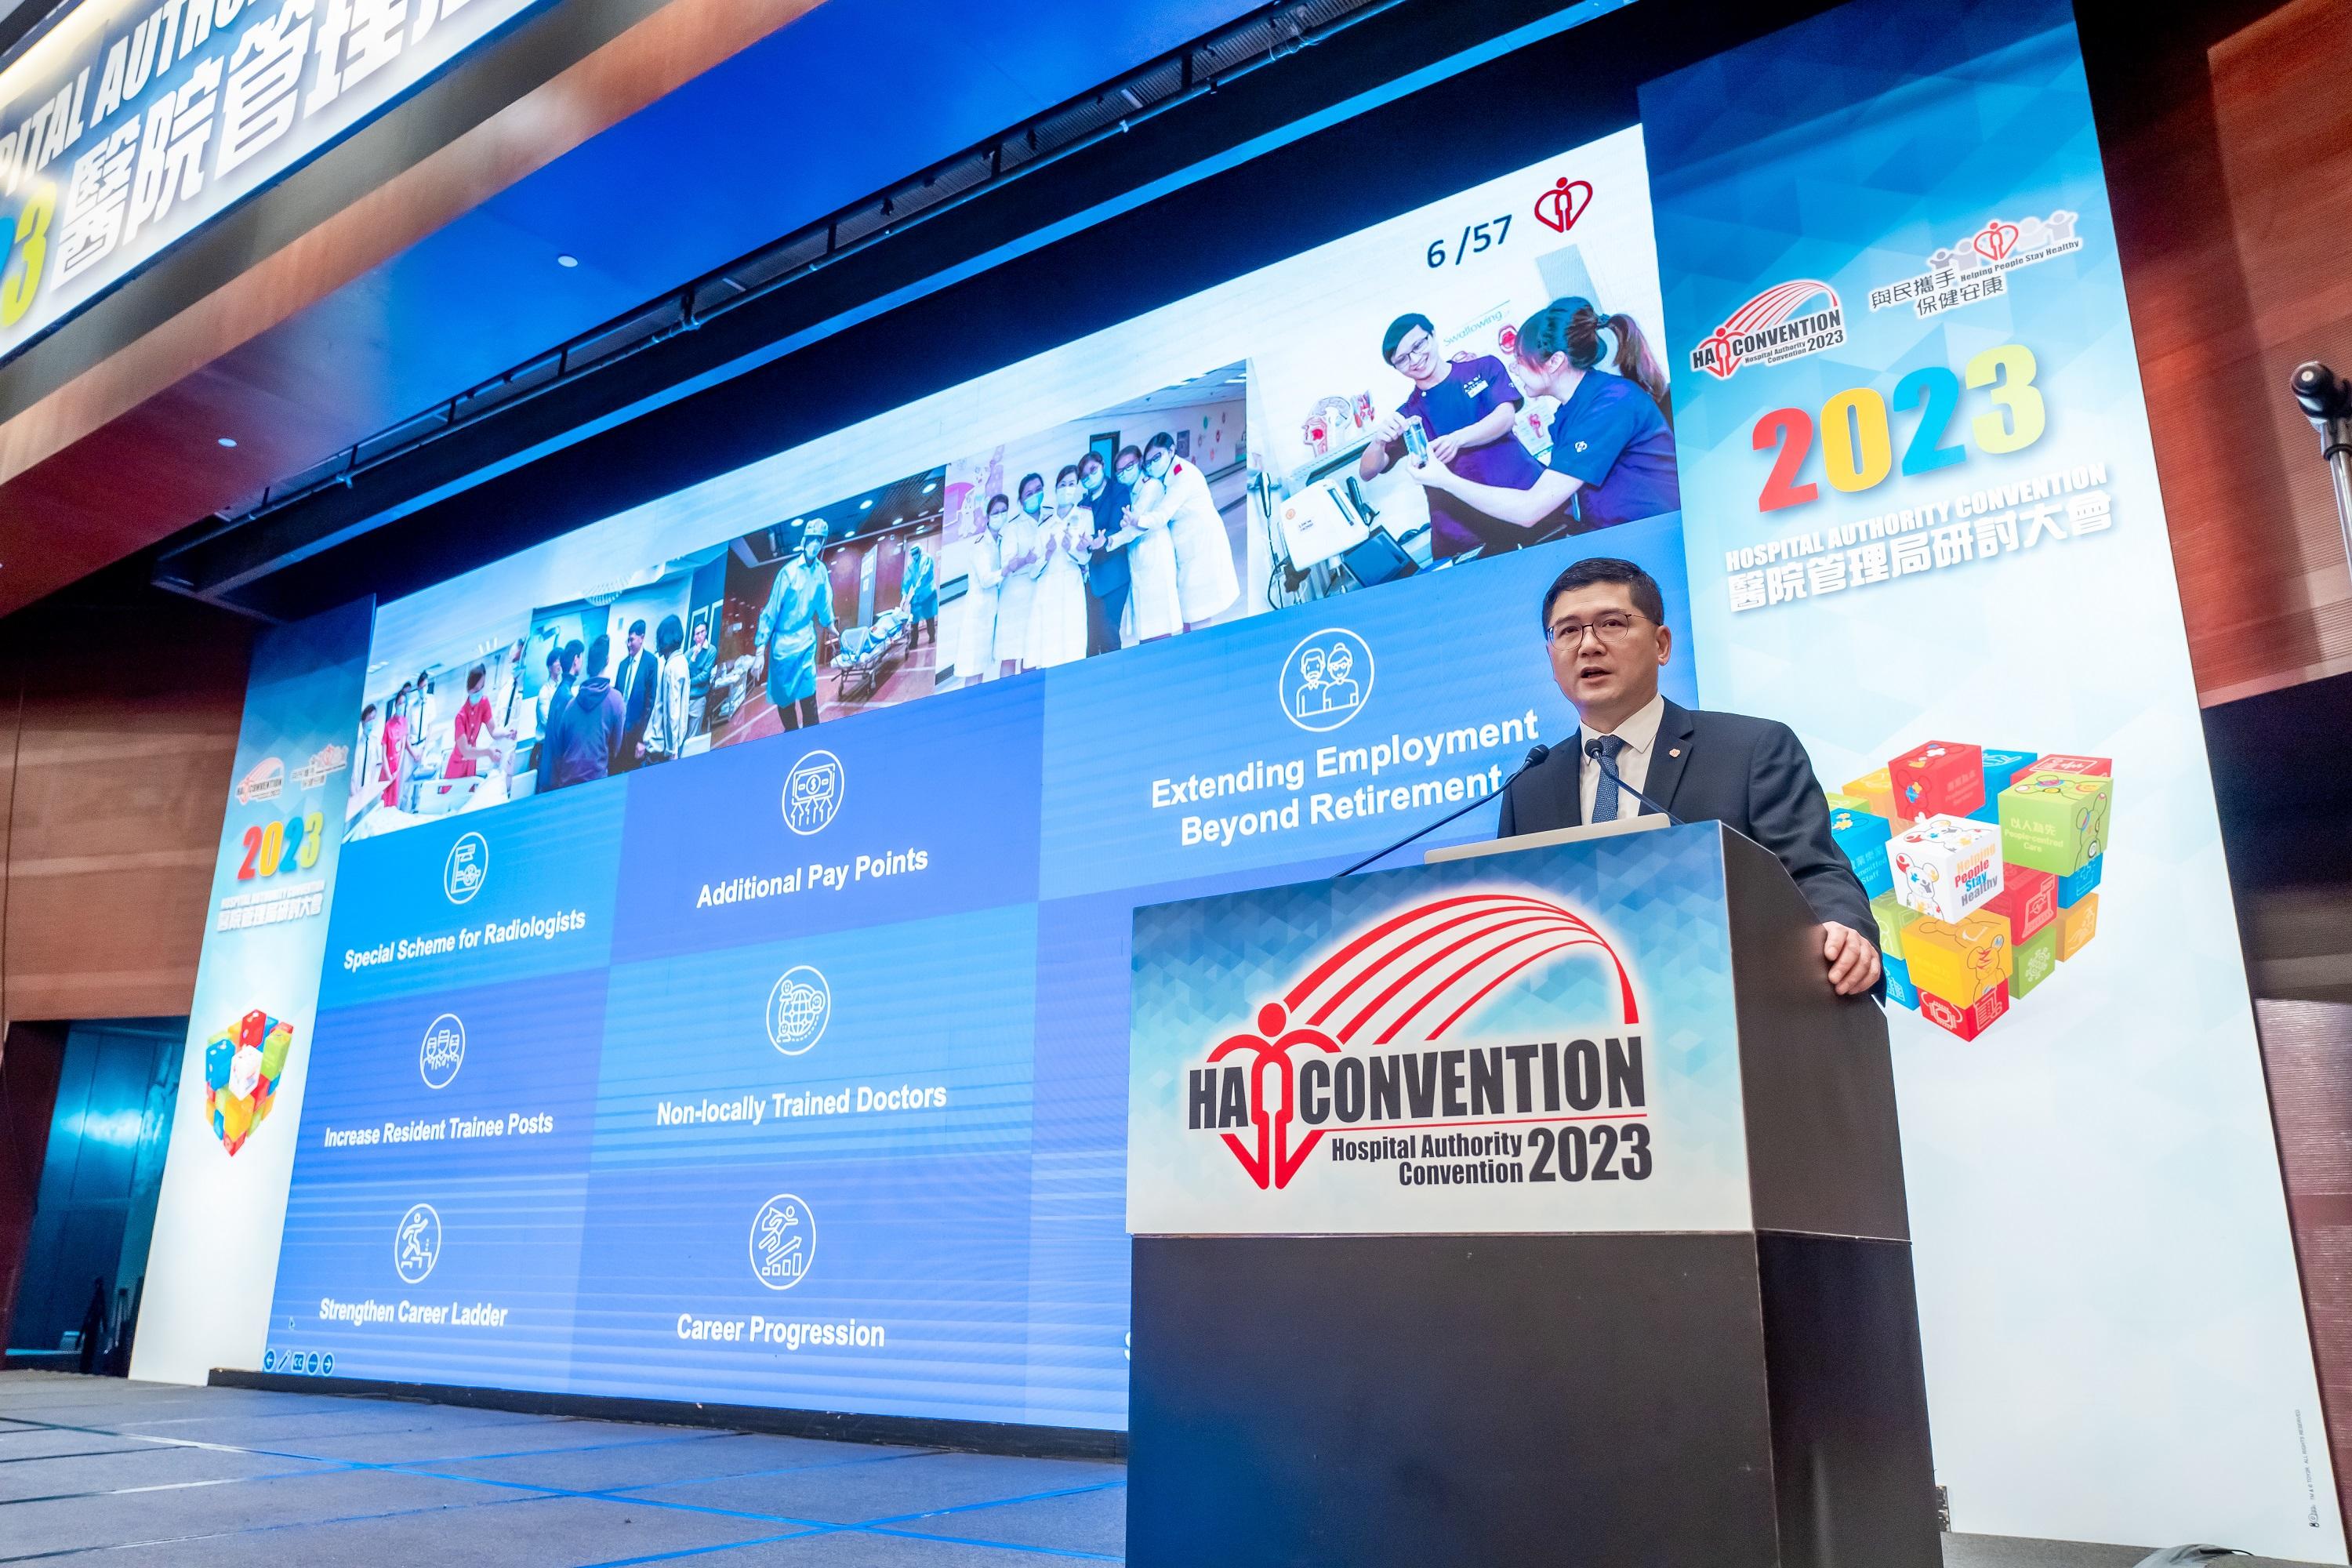 The Hospital Authority (HA) Convention 2023 is being held in both physical and virtual formats today and tomorrow (May 16 and 17). Photo shows the HA Chief Executive, Dr Tony Ko, delivering a speech at the opening ceremony of the Convention.